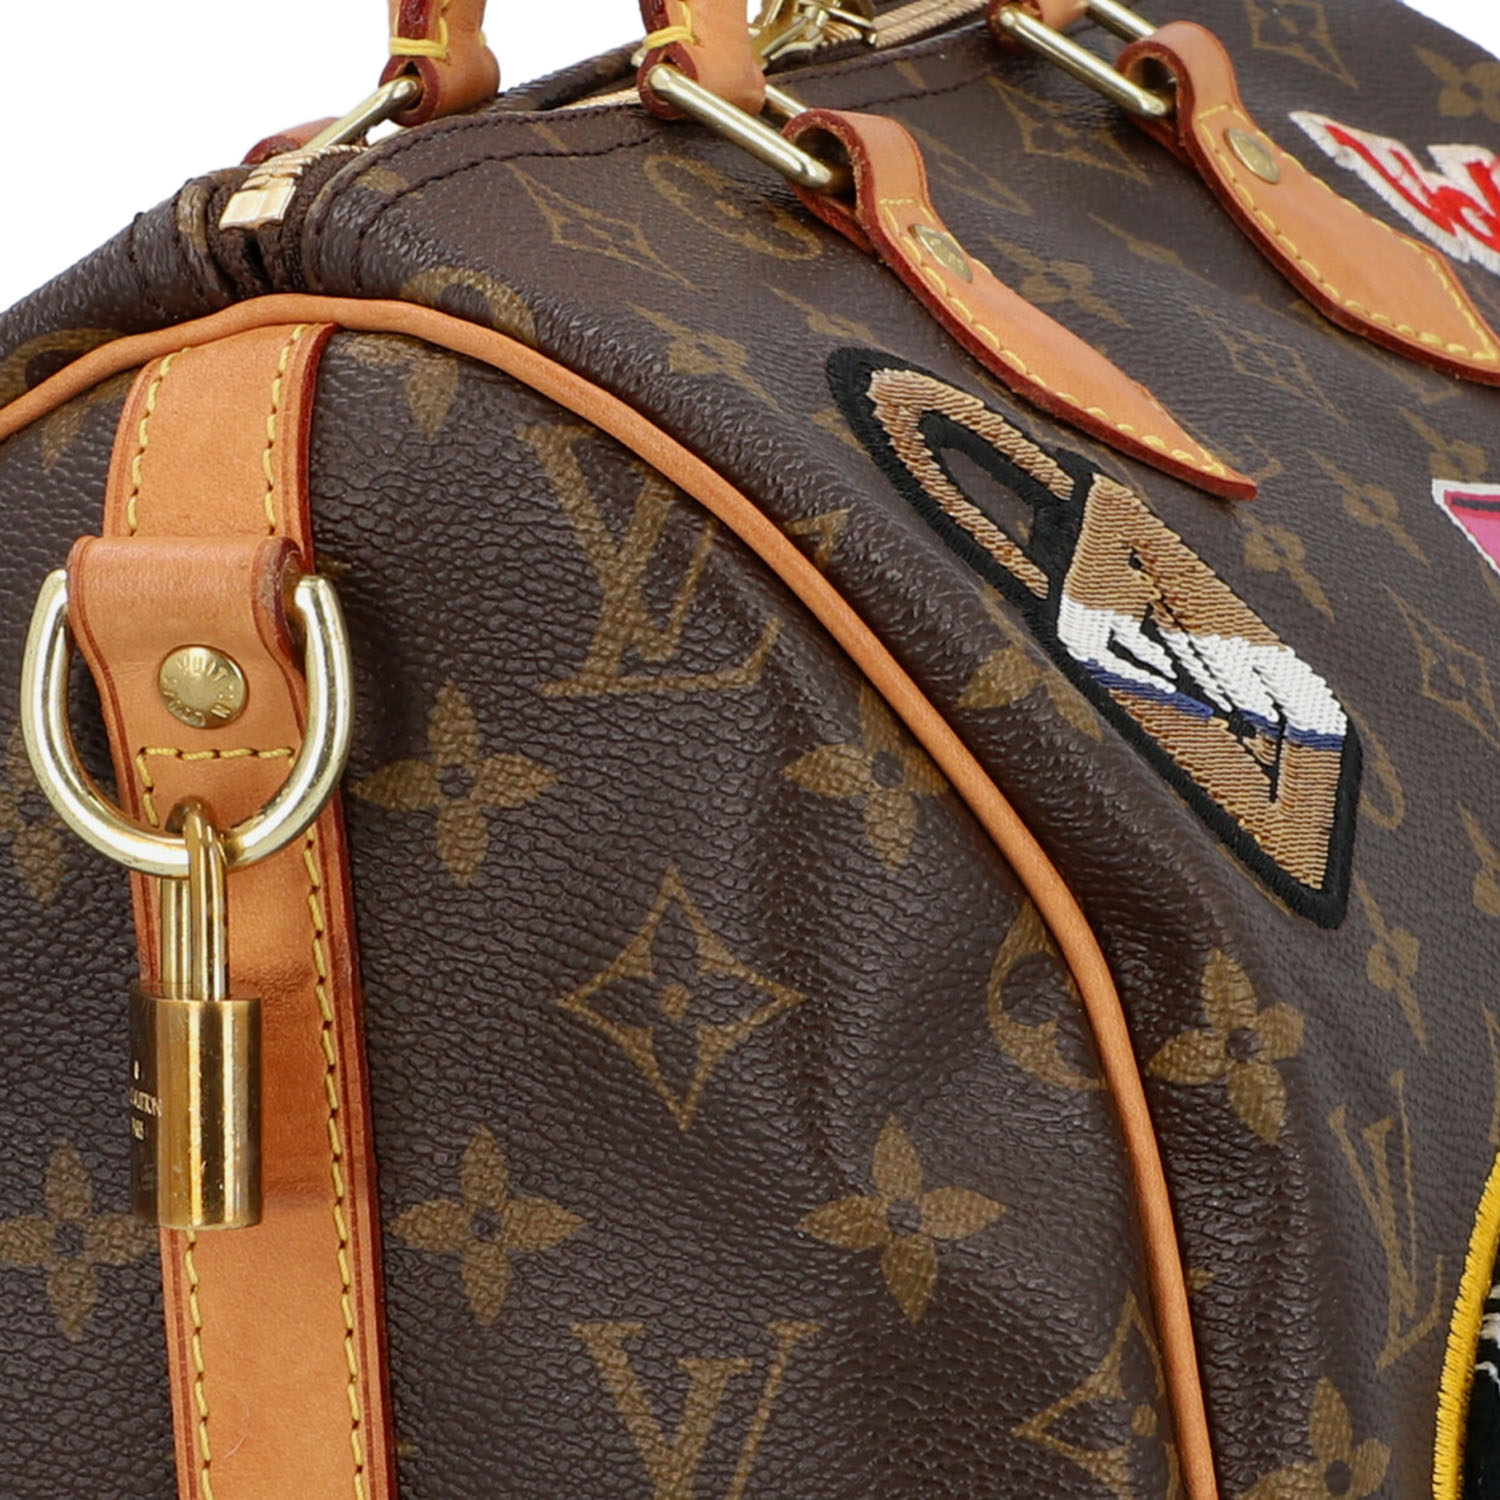 LOUIS VUITTON Handtasche "SPEEDY 30", Capsule Kollektion Hiver 2018.Limited Edition. M - Image 8 of 9